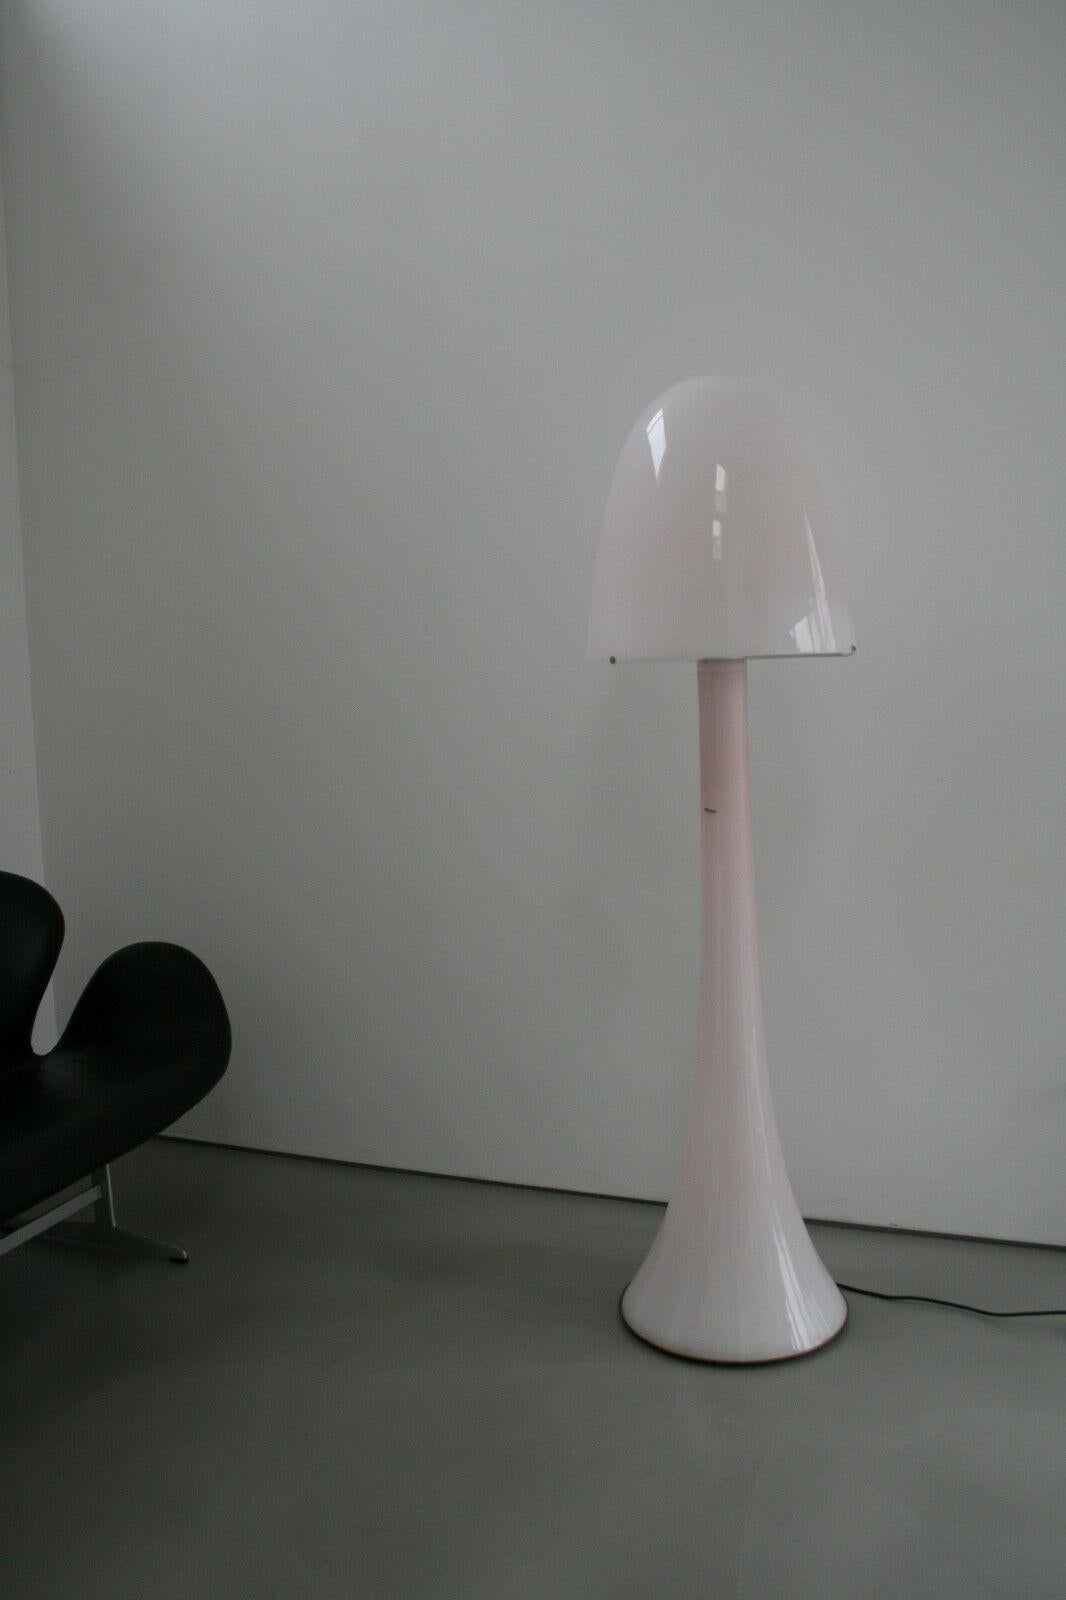 Mouth blown Murano glass floor lamp with 4 sockets (3 in the base of the lamp, 1 in the lampshade). Rare model by Italian manufacturer AV Mazzega.